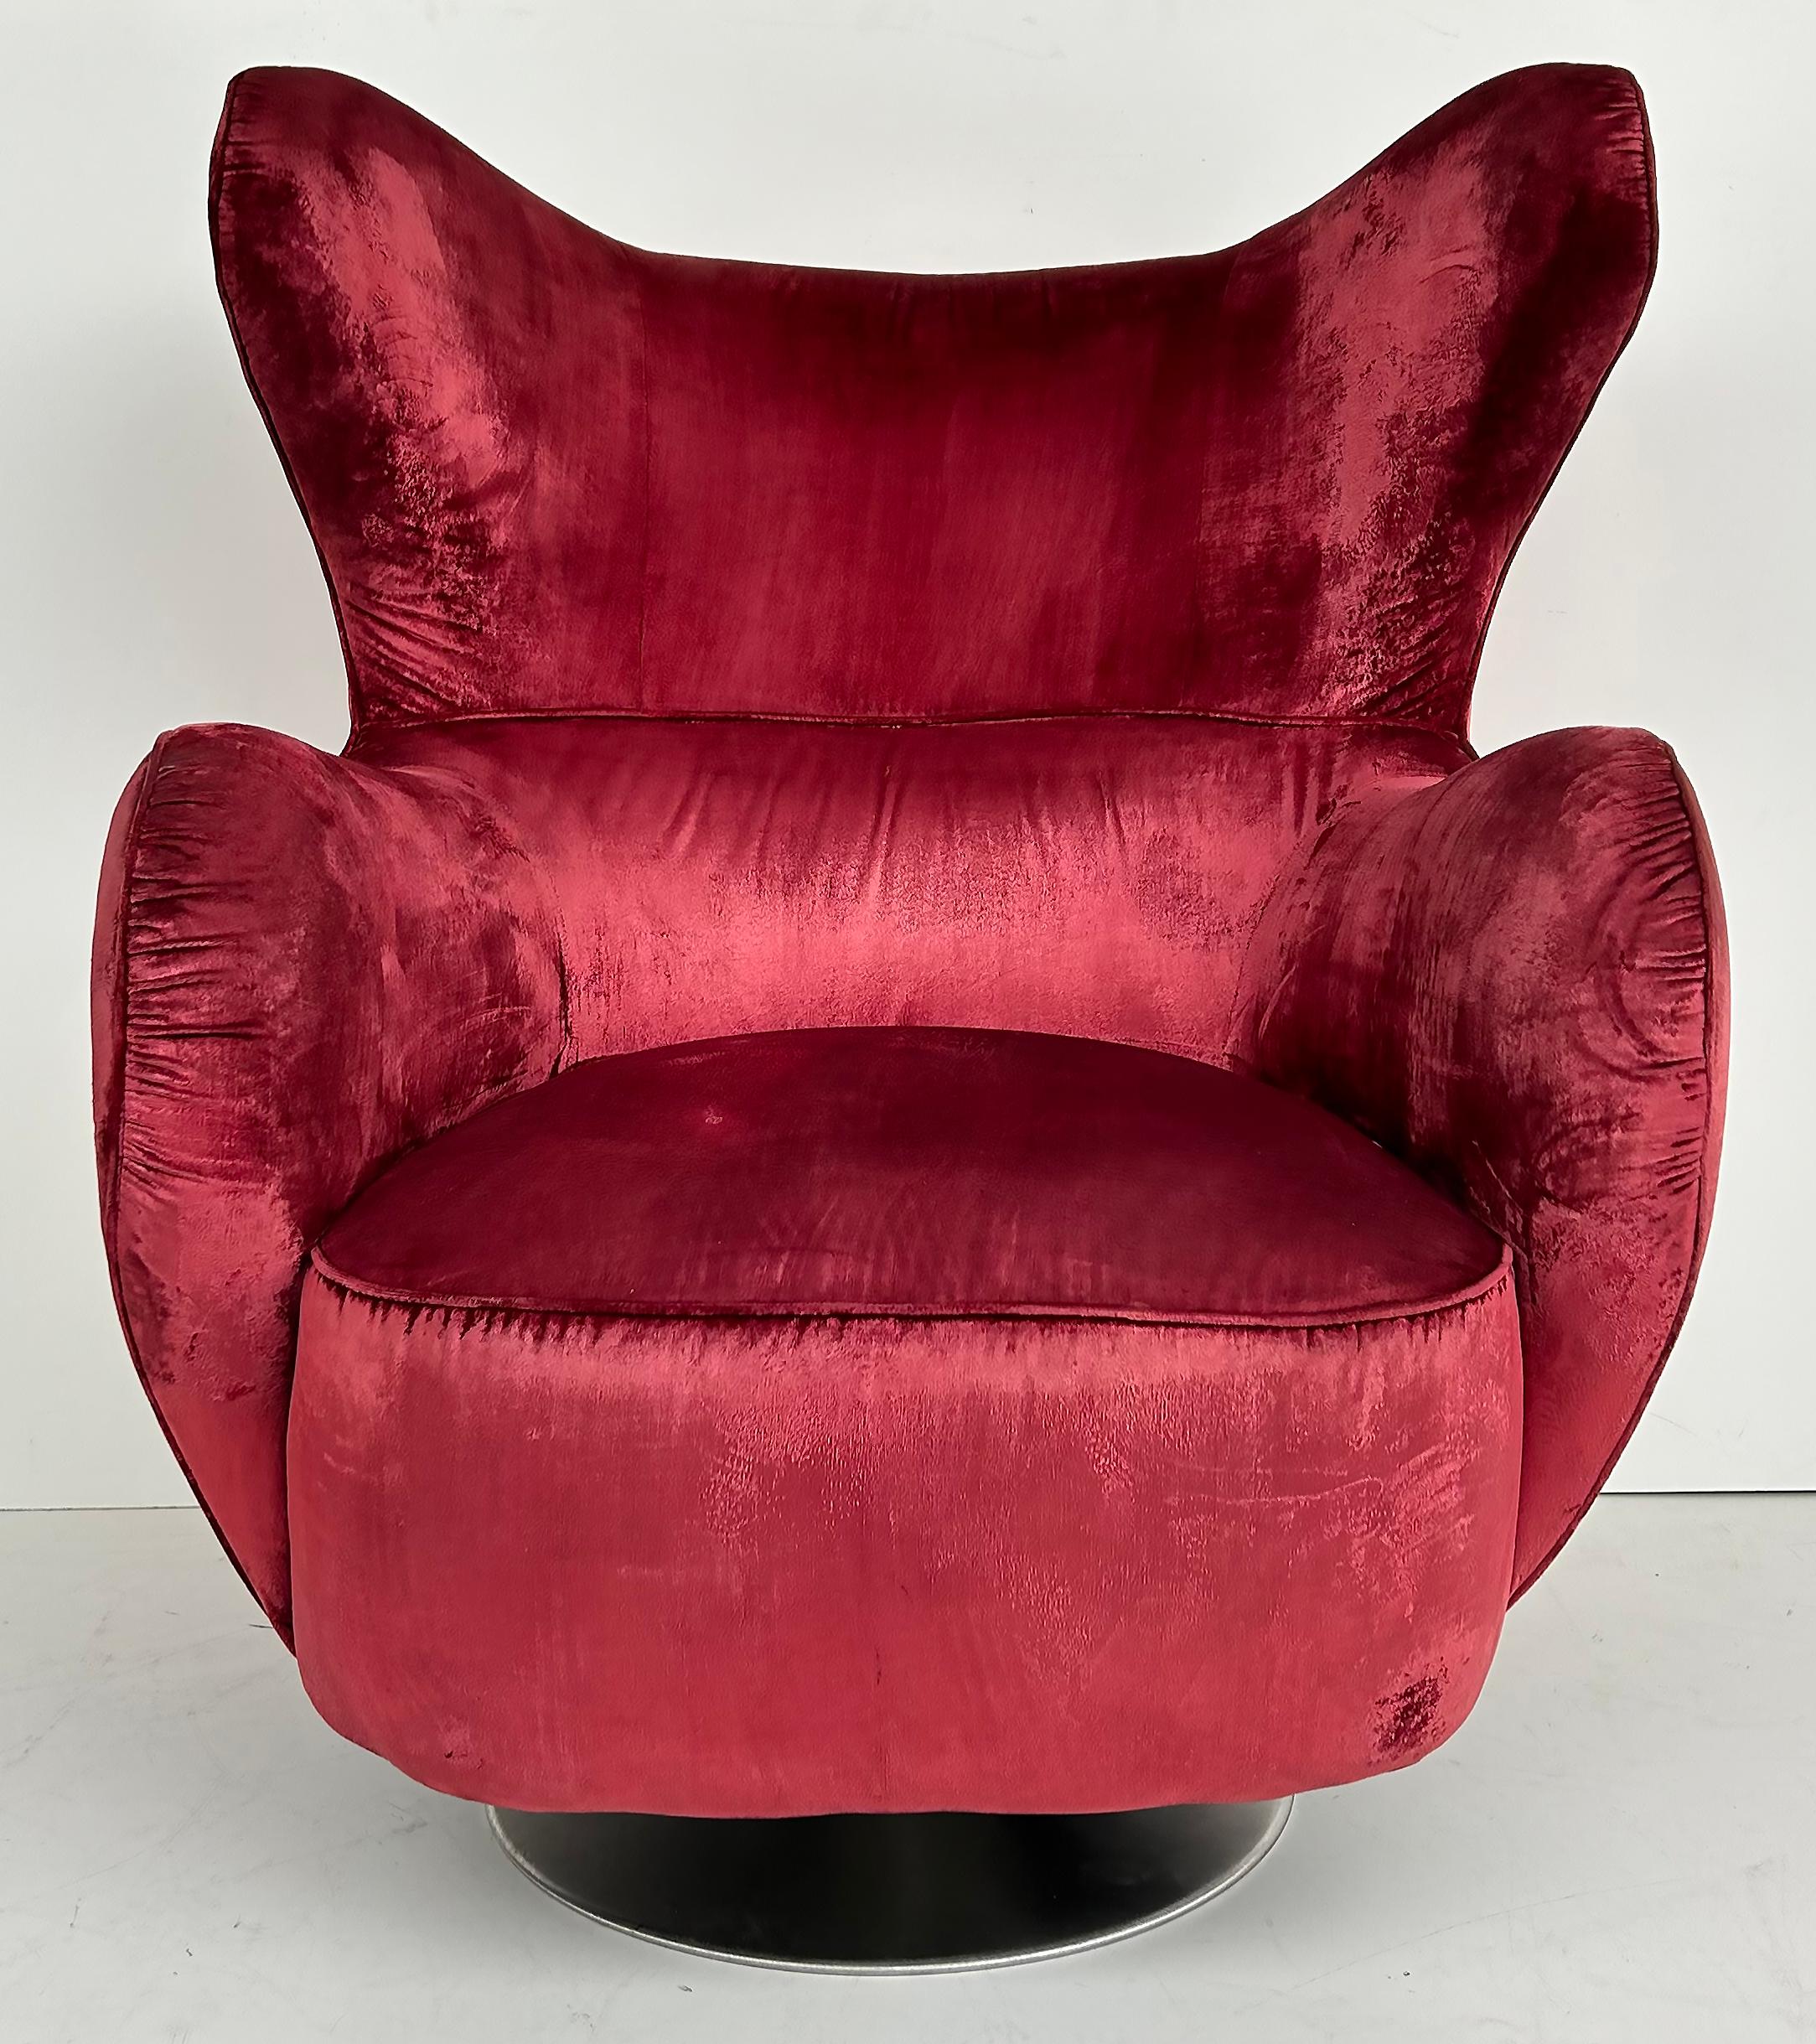 Vladimir Kagan New York Collection Swivel Chair with Original Upholstery

Offered for sale is an original Vladimir Kagan  